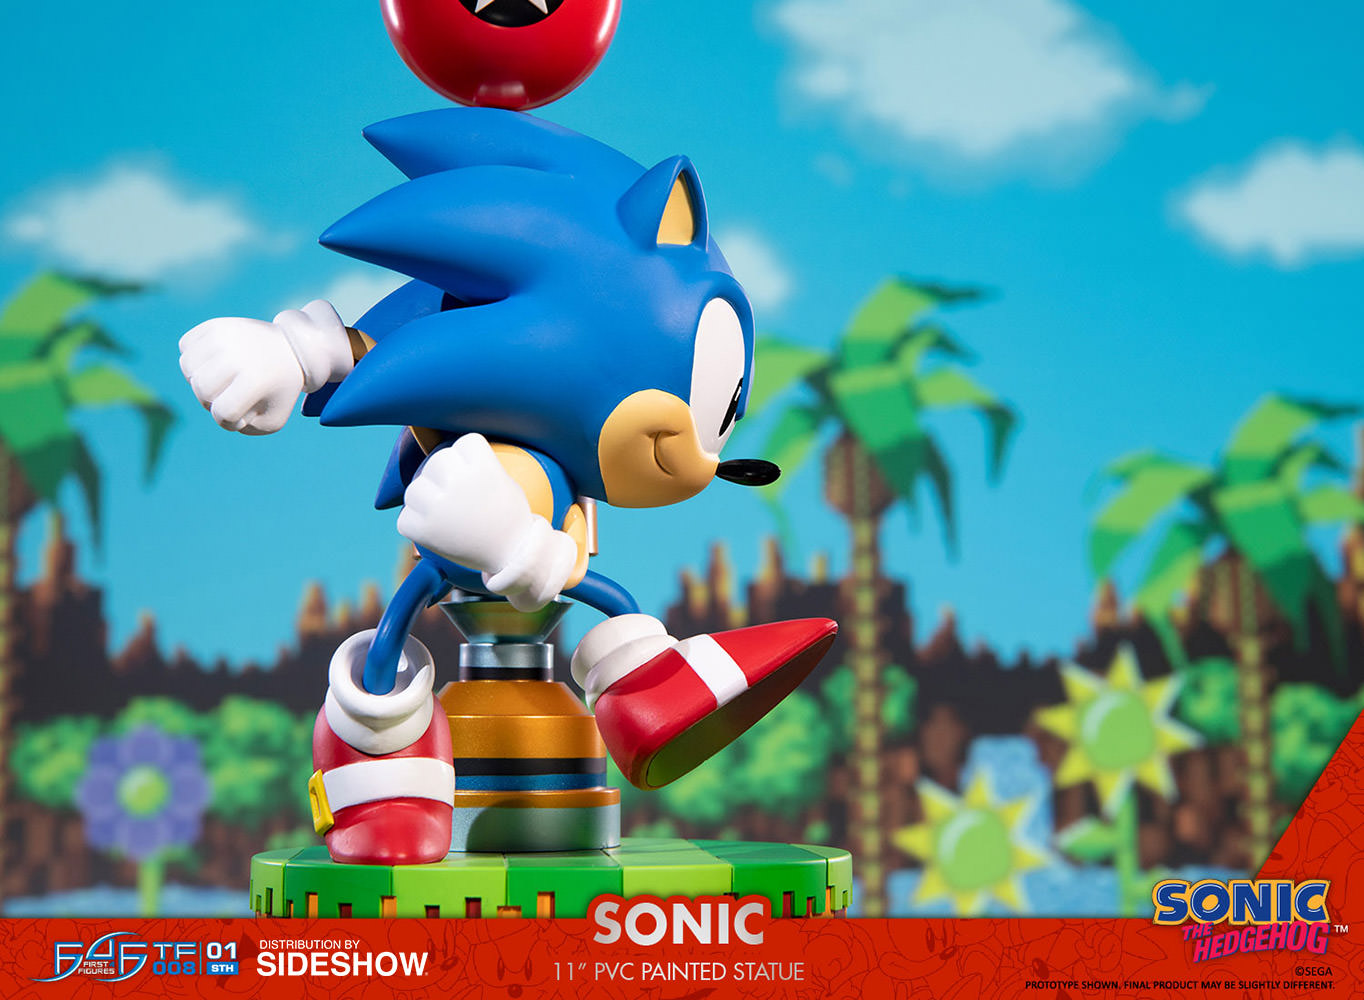 Sonic the Hedgehog Statue by First 4 Figures